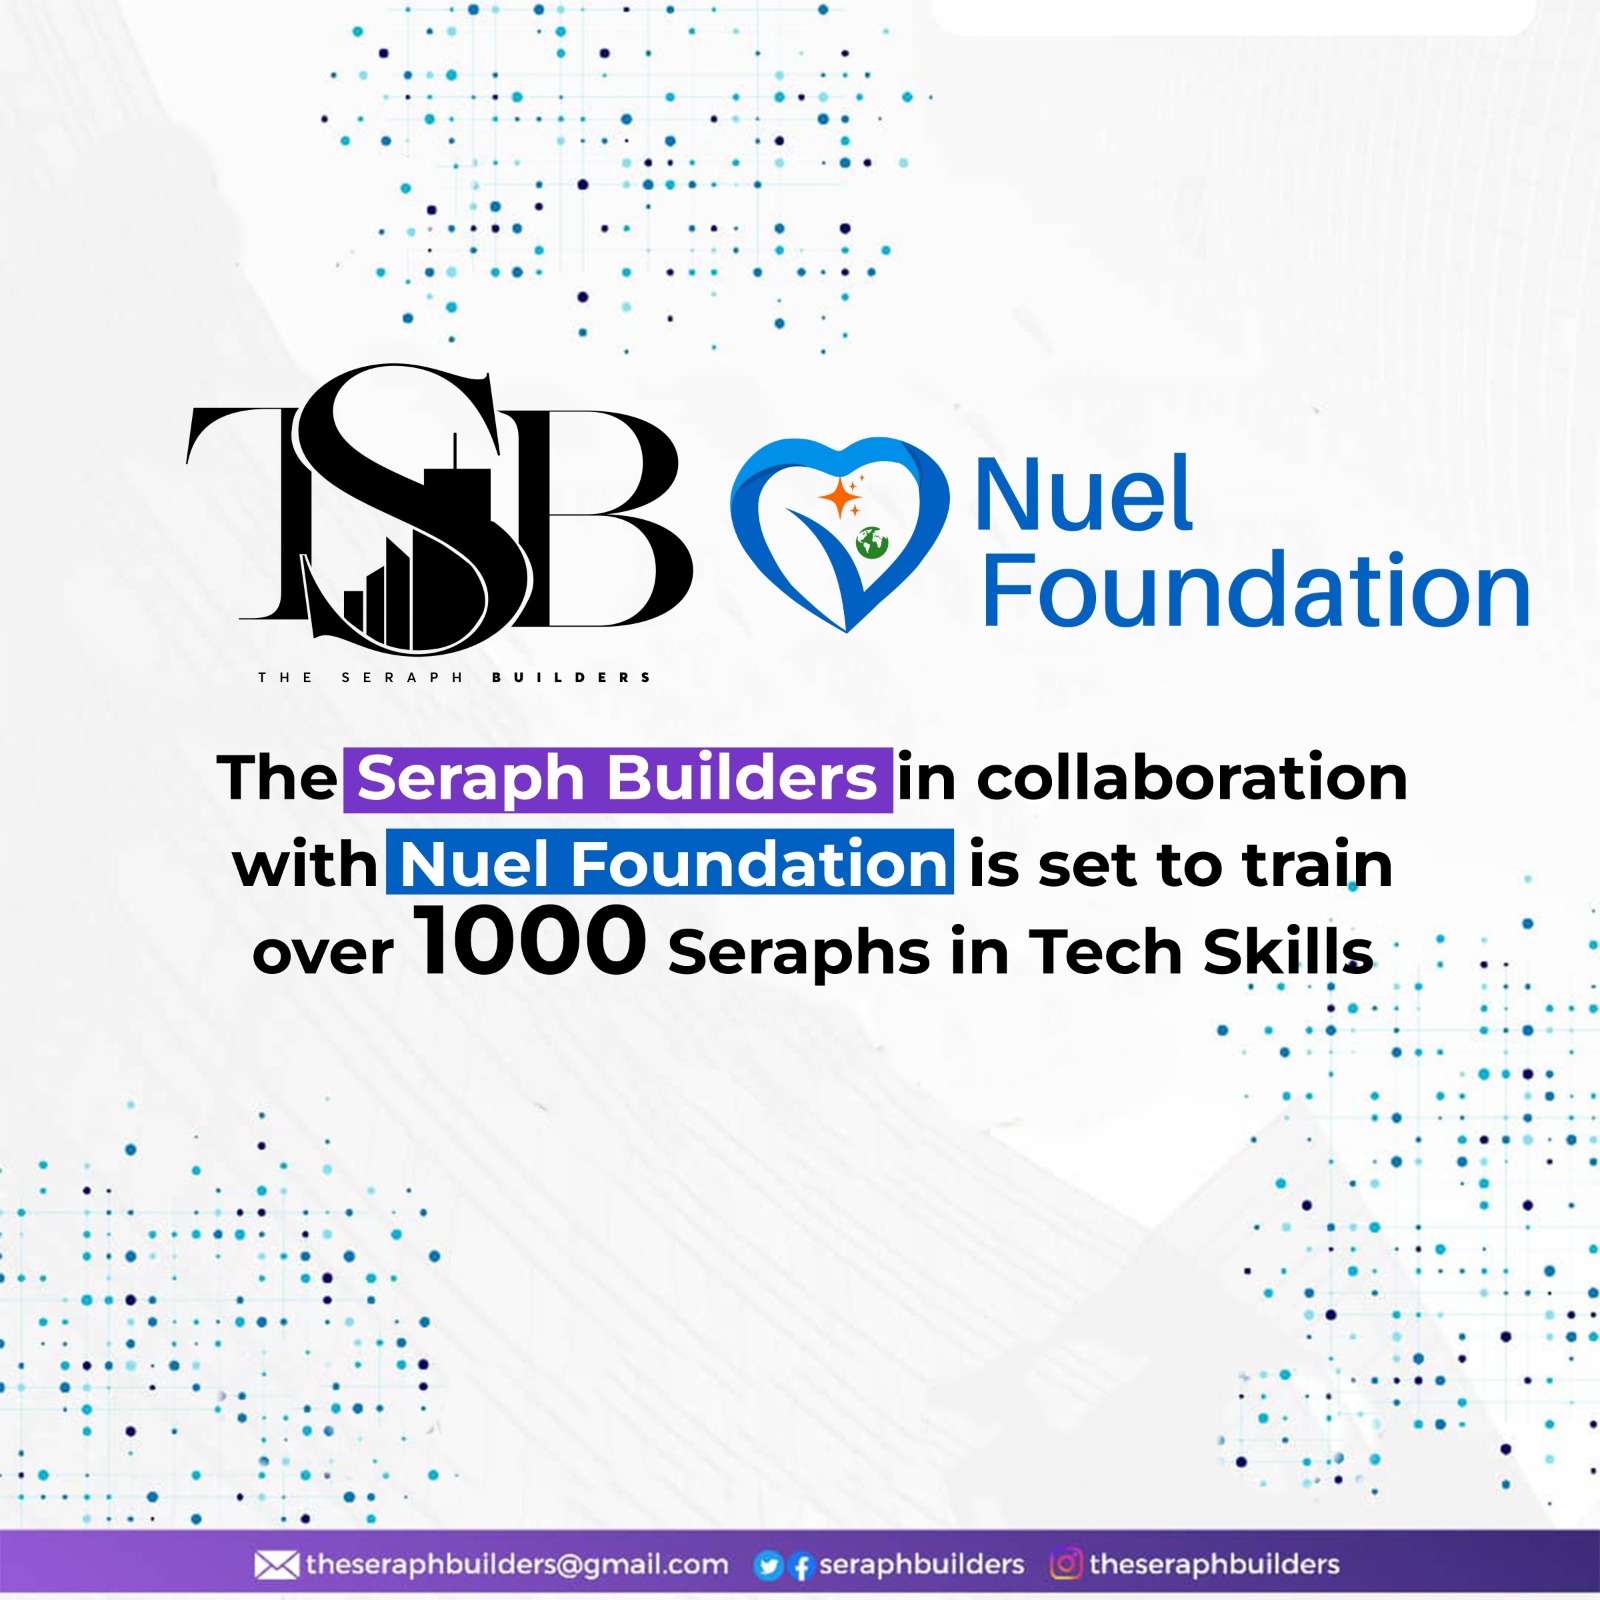 The Seraph Builders Is Set to Empower Over 1000 C&S Members In Tech Globally